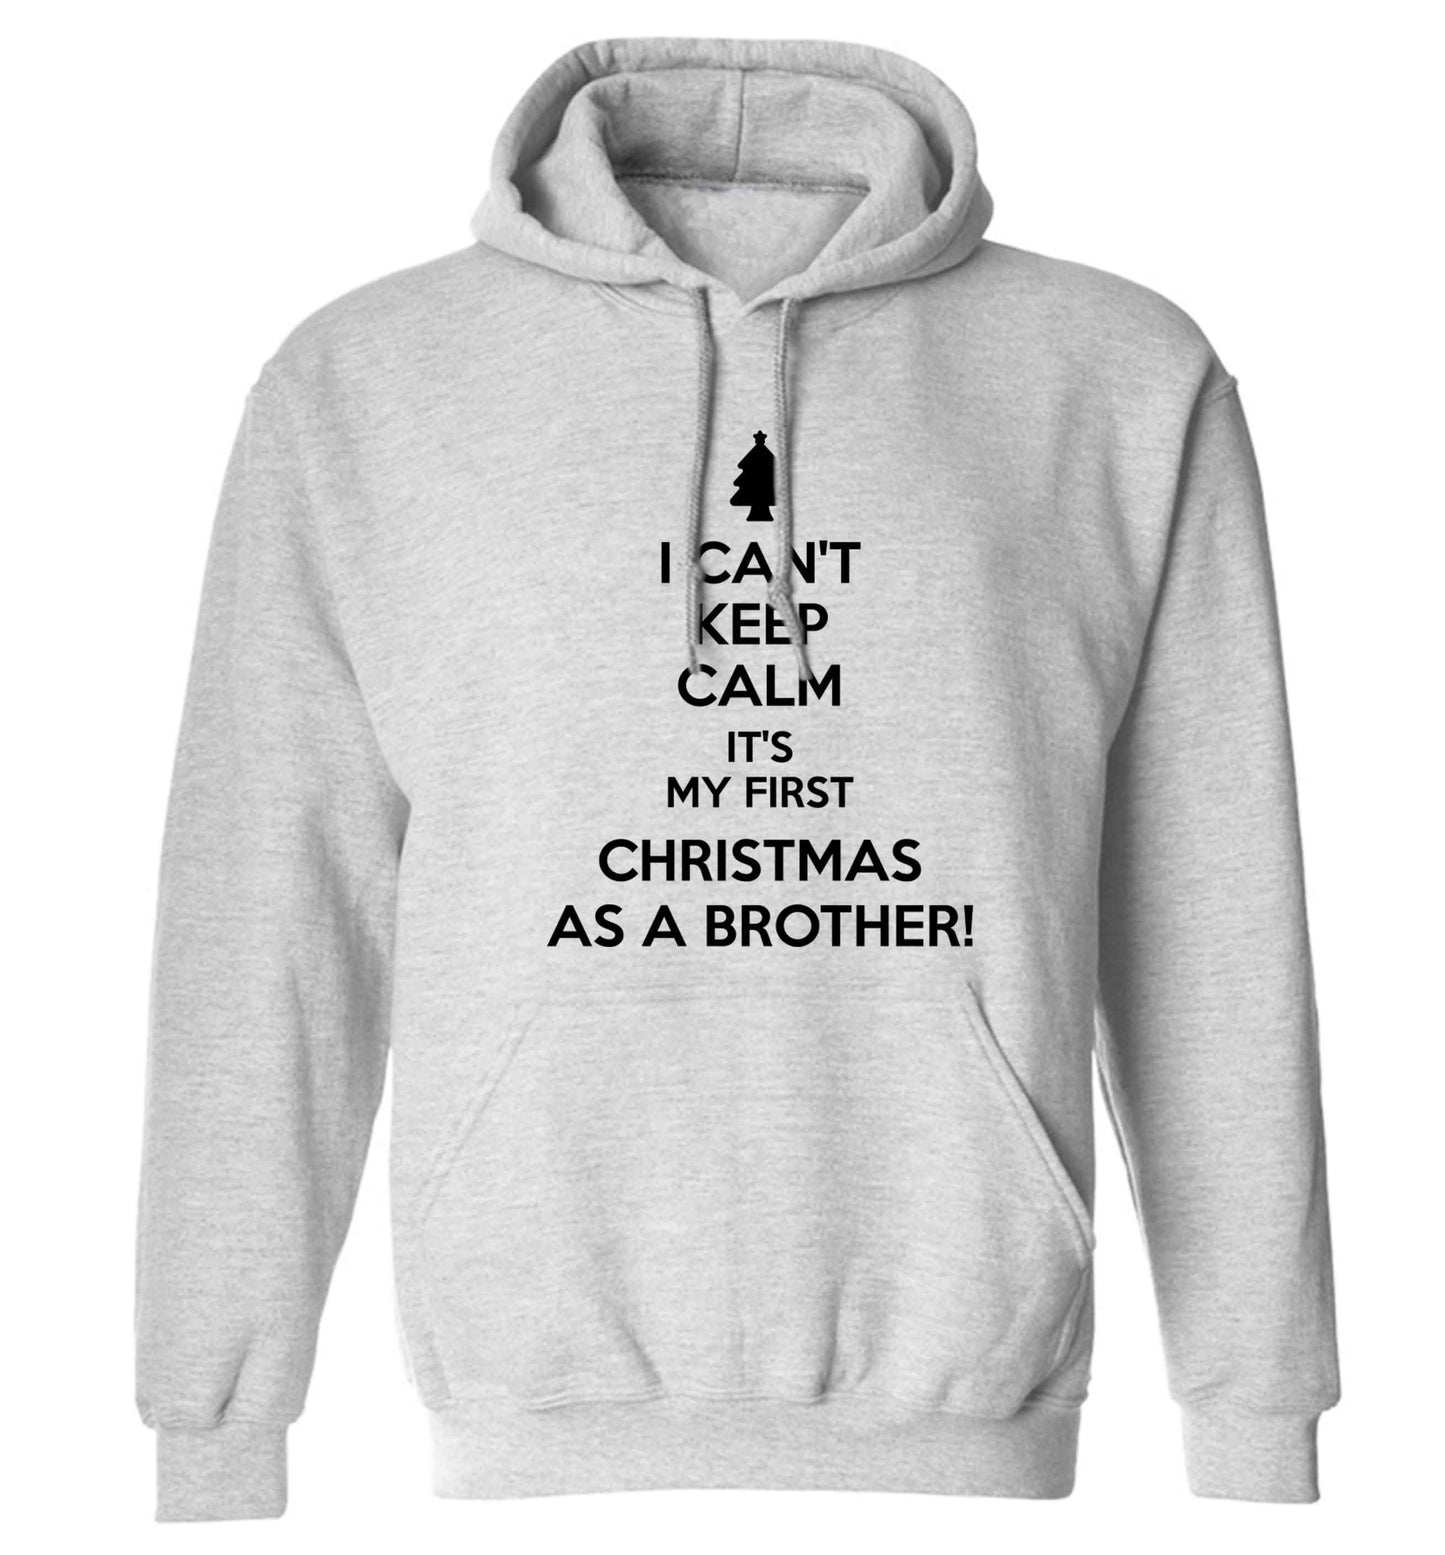 I can't keep calm it's my first Christmas as a brother! adults unisex grey hoodie 2XL